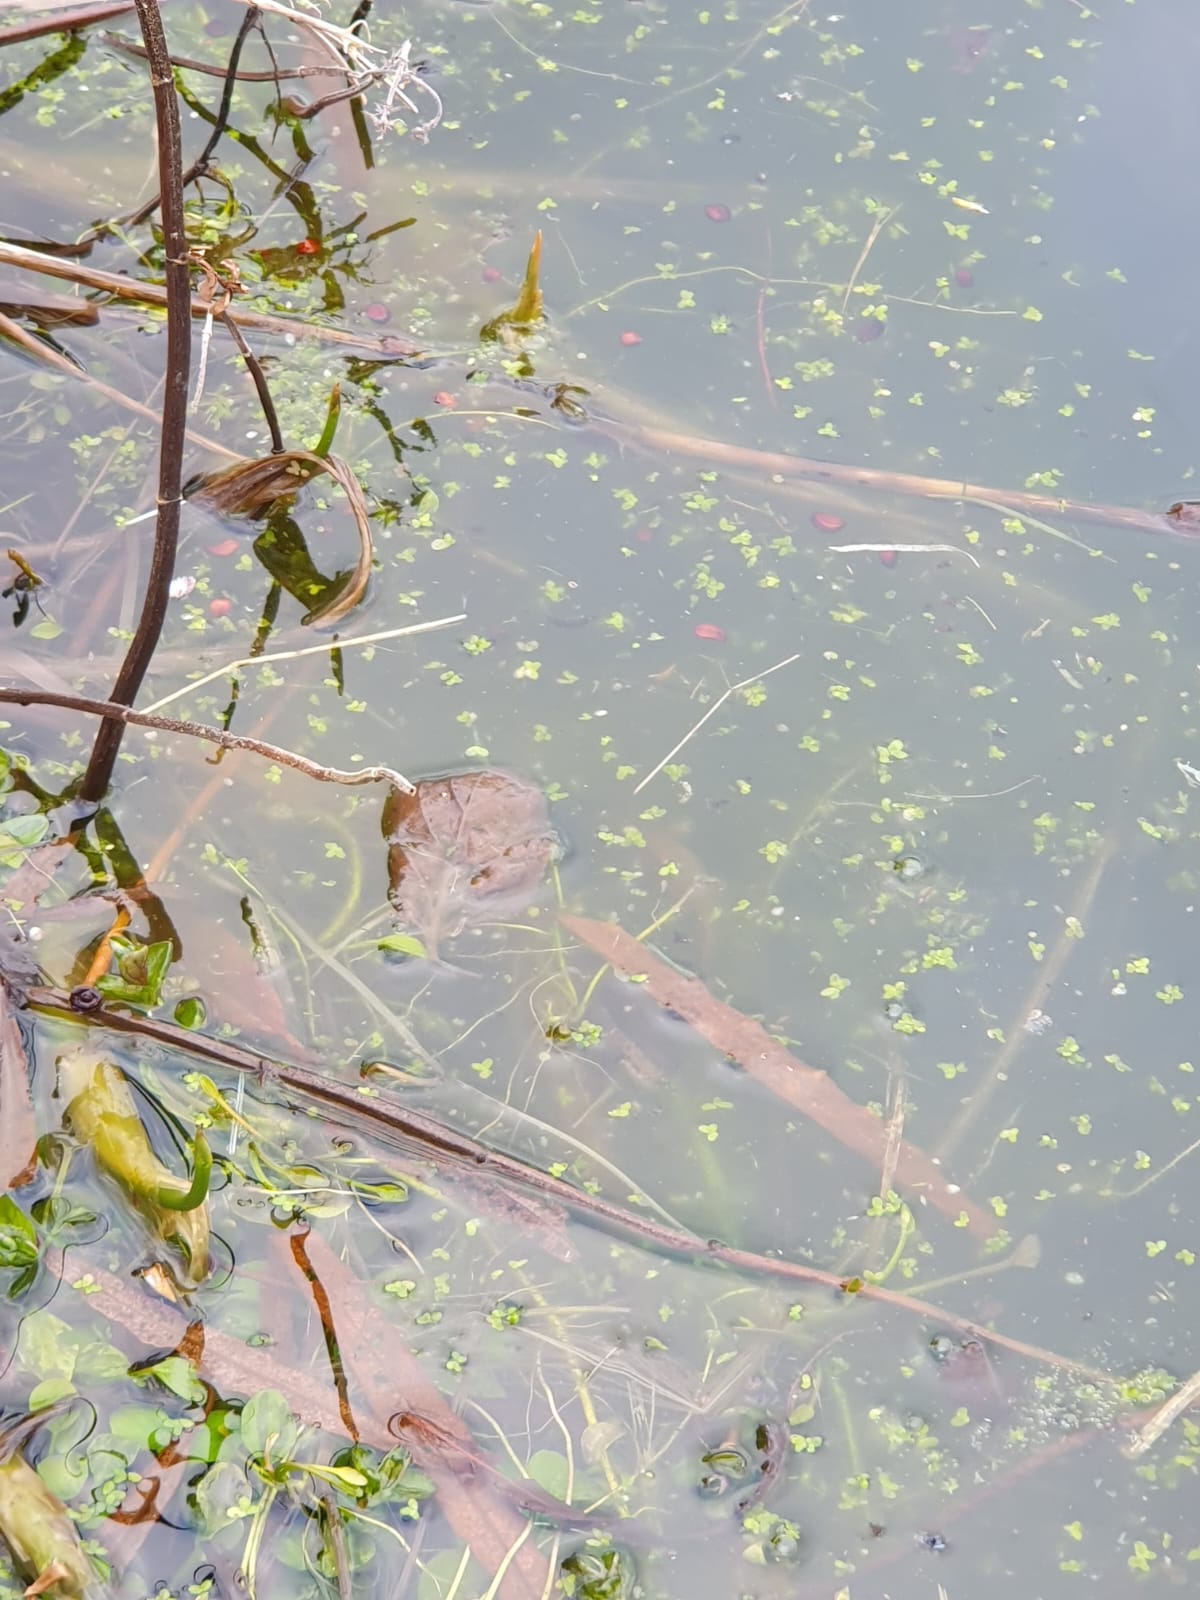 the glassy surface, punctured by weeds and with a little floating scum. Right at the center of the photo is a vague brown curved blur which i swear is a newt